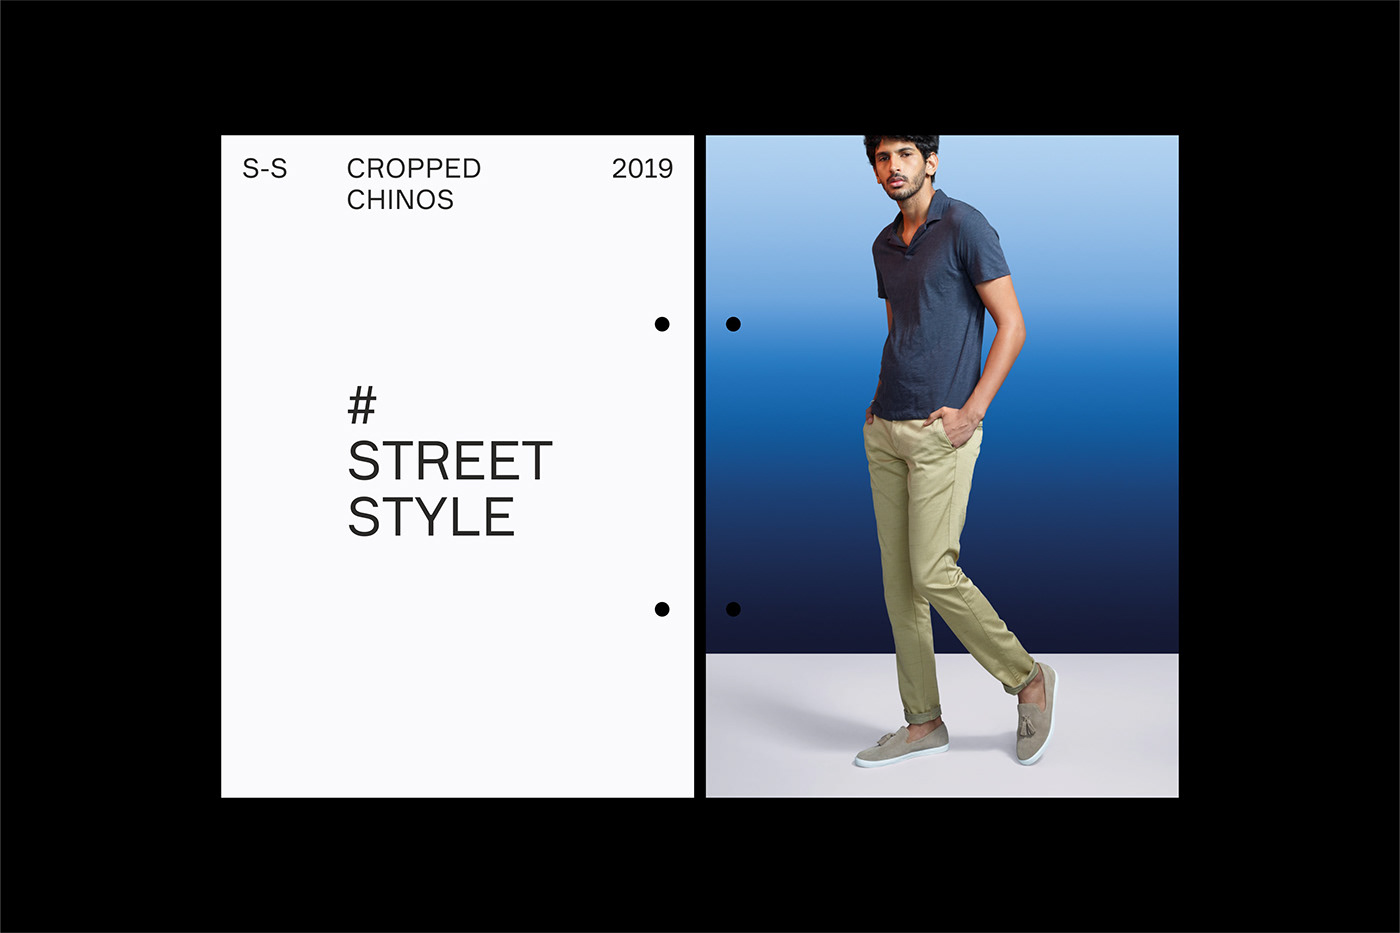 Advertising  campaign Fashion  Menswear jeans portfolio photographer digital photography  trousers chinos